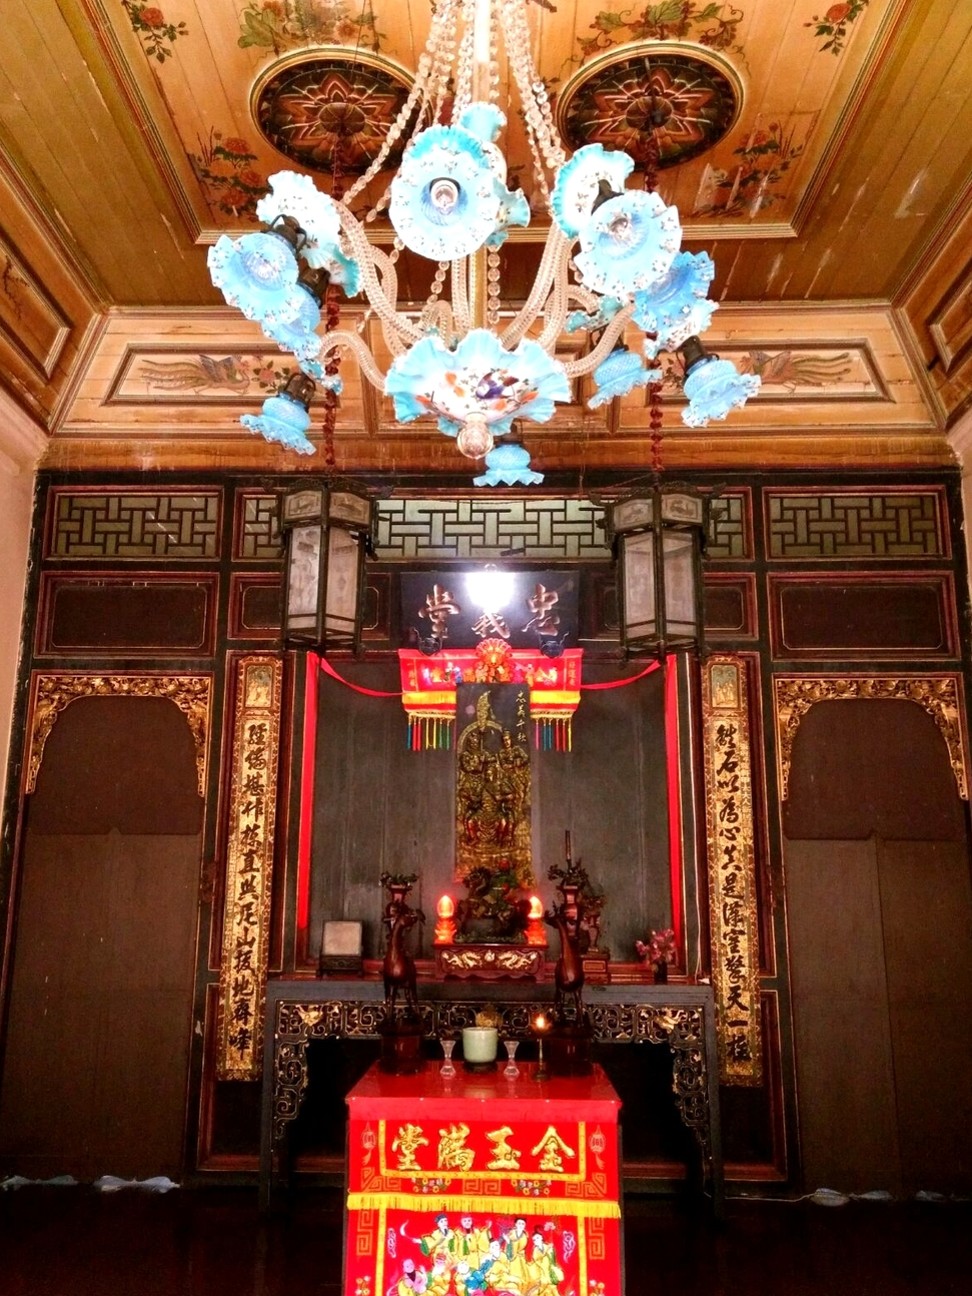 Inside the Tjong A Fie Mansion in Medan, Indonesia. Photo: courtesy of the Tjong A Fie Institute